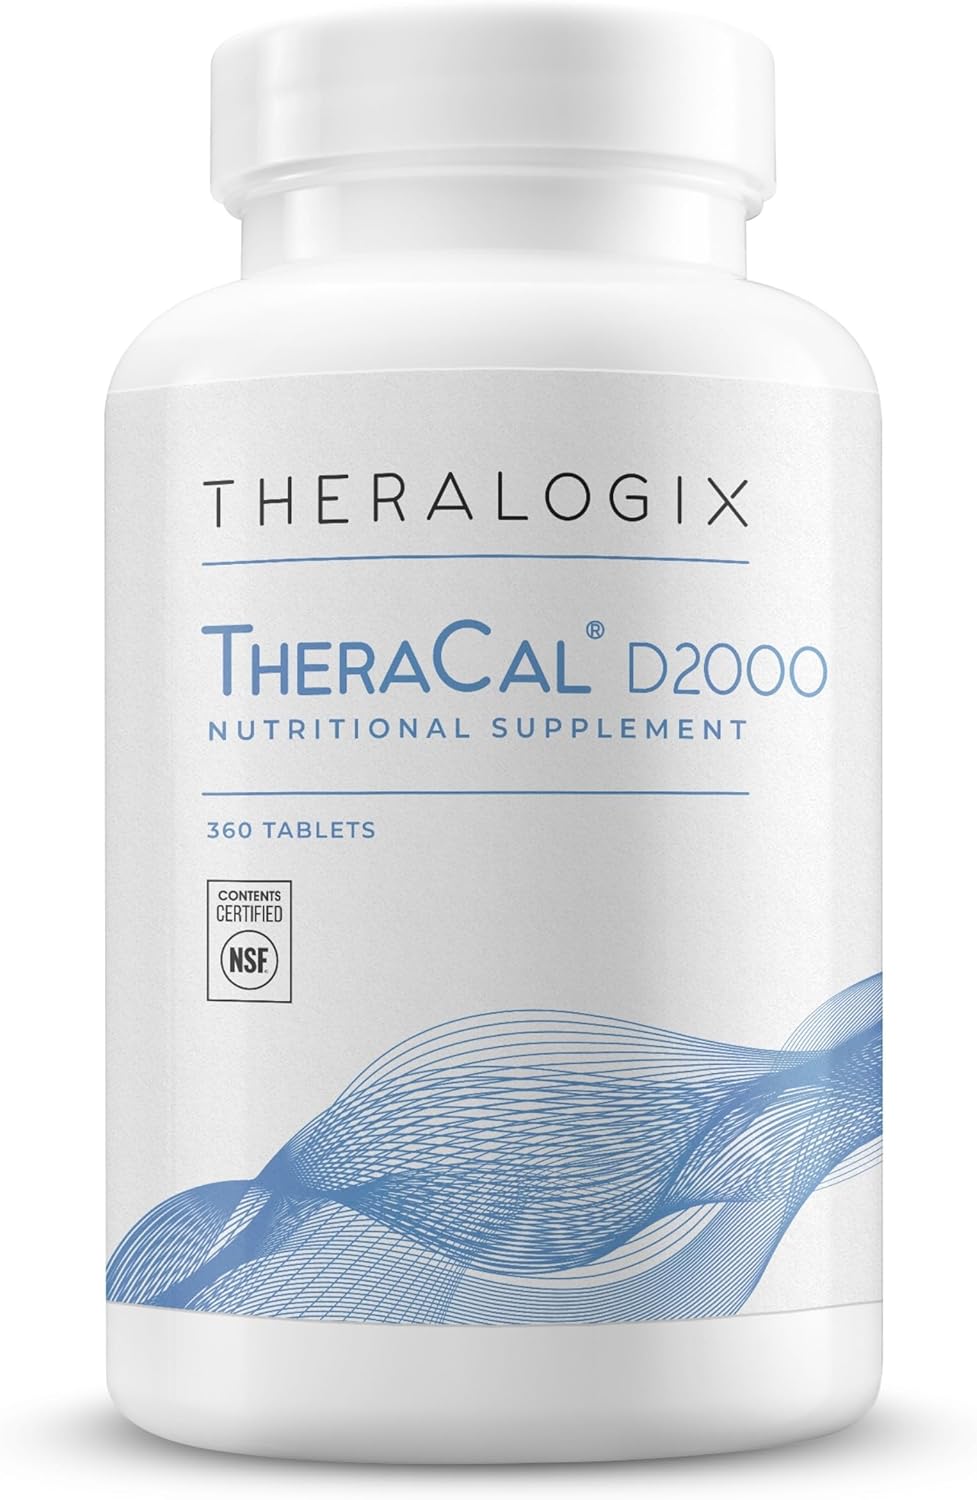 Theralogix TheraCal D2000 - Bone Health Support Supplement with Calcium, Magnesium, Vitamin D3, Vitamin K2 & Boron* - 90-Day Supply - NSF Certified - 360 Tablets